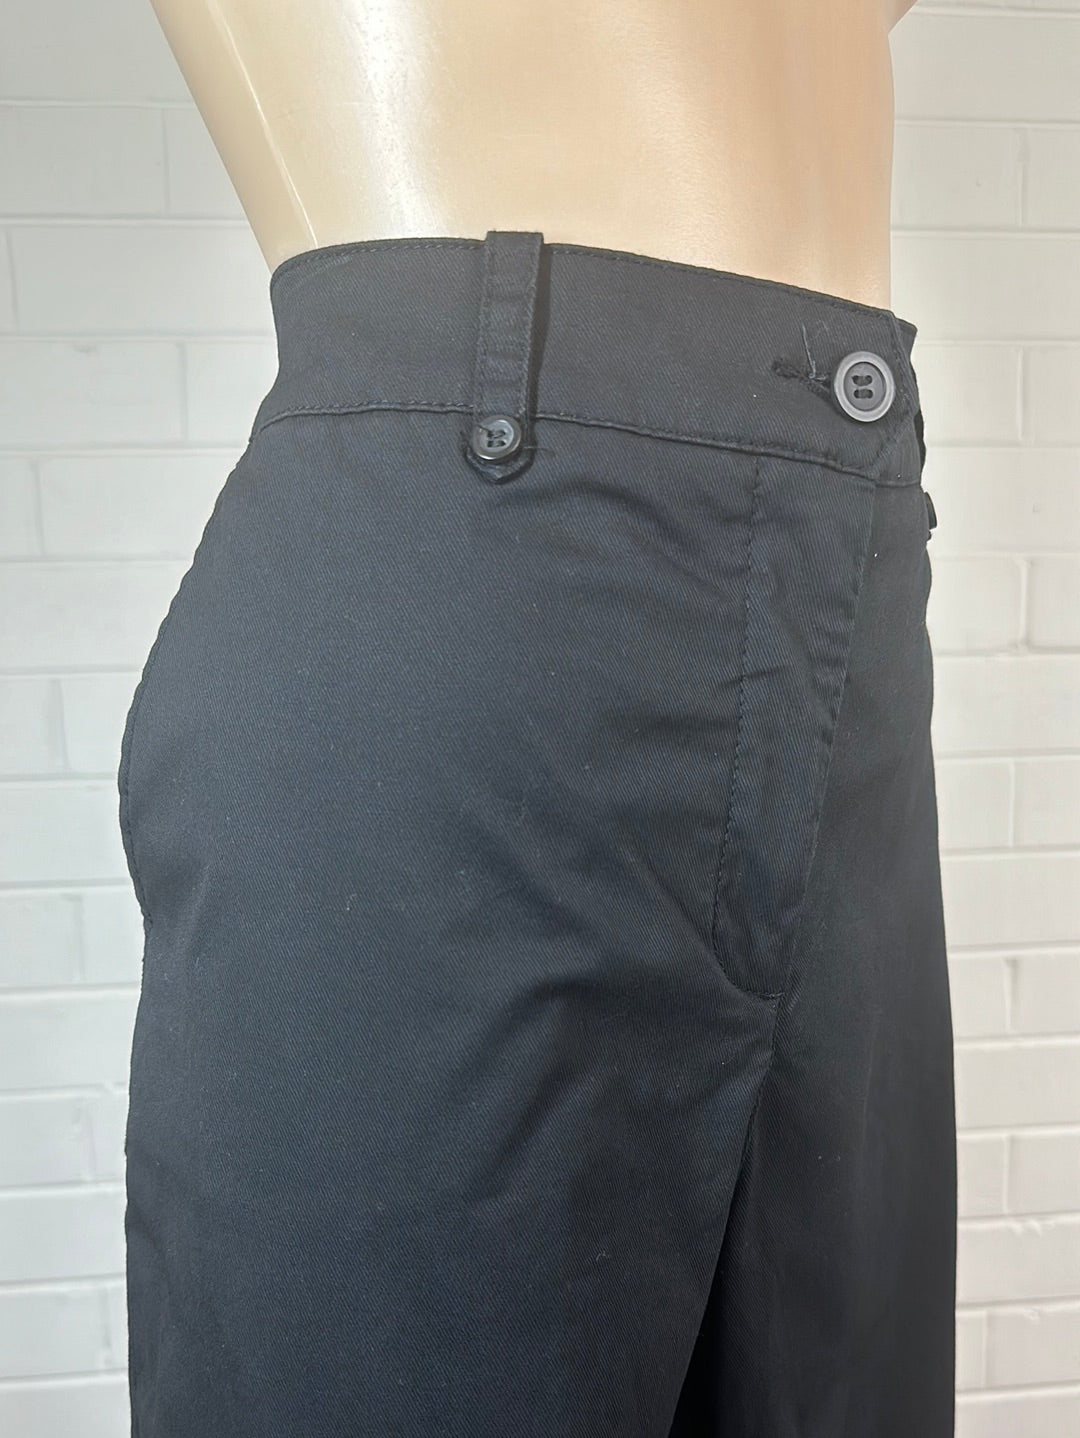 Country Road | pants | size 12 | tapered leg | new with tags